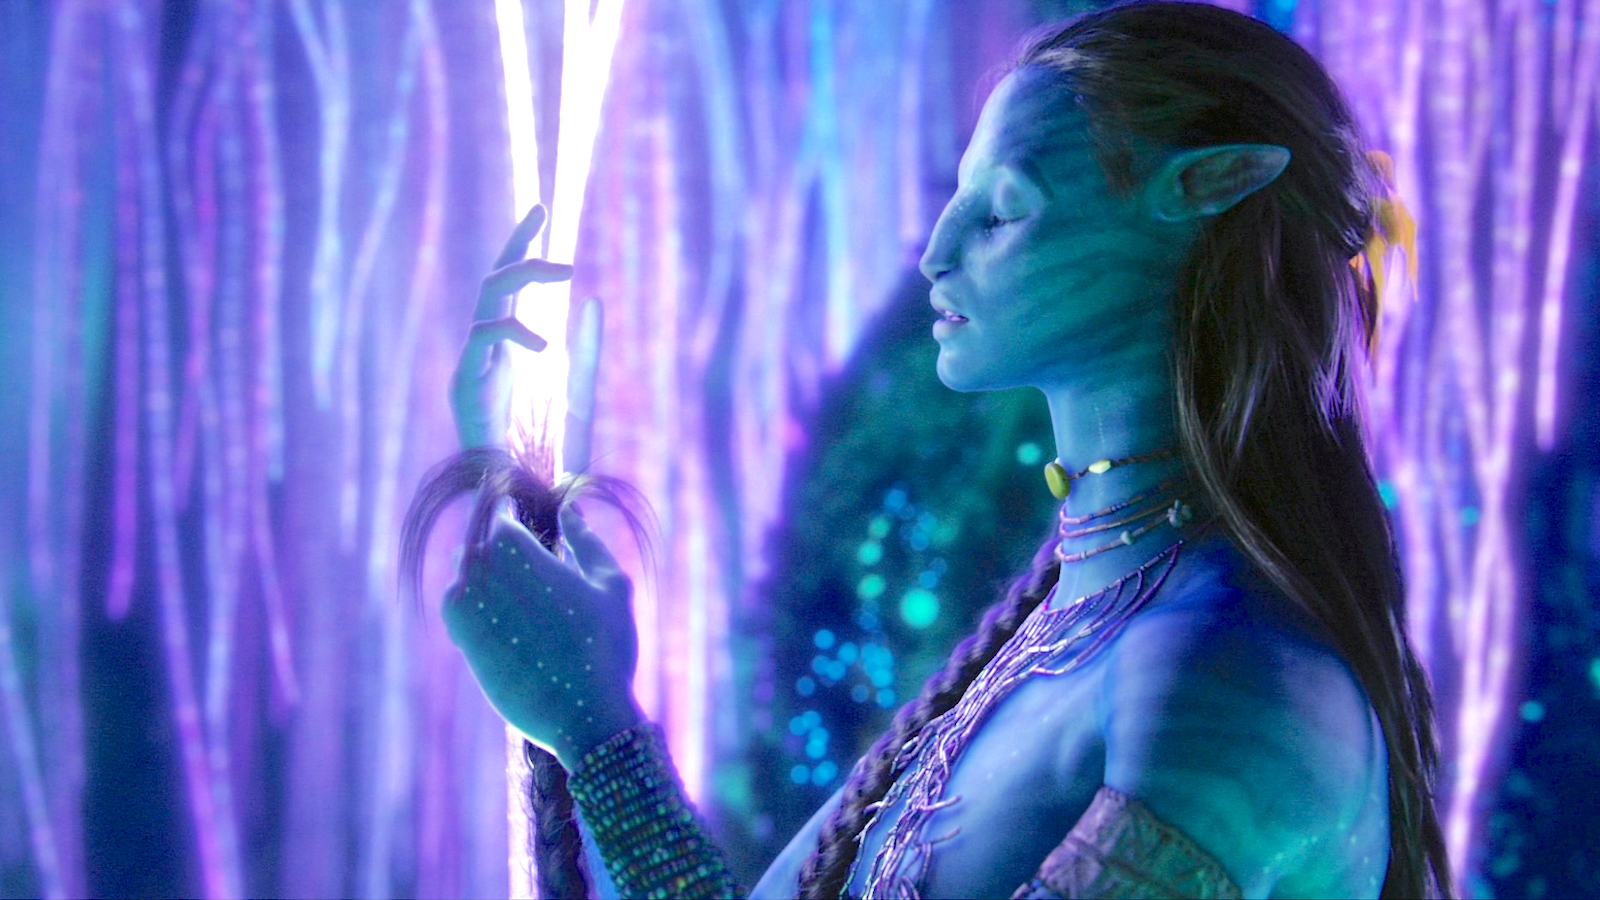 A Na’vi using the strands of her hair to connect with Eywa